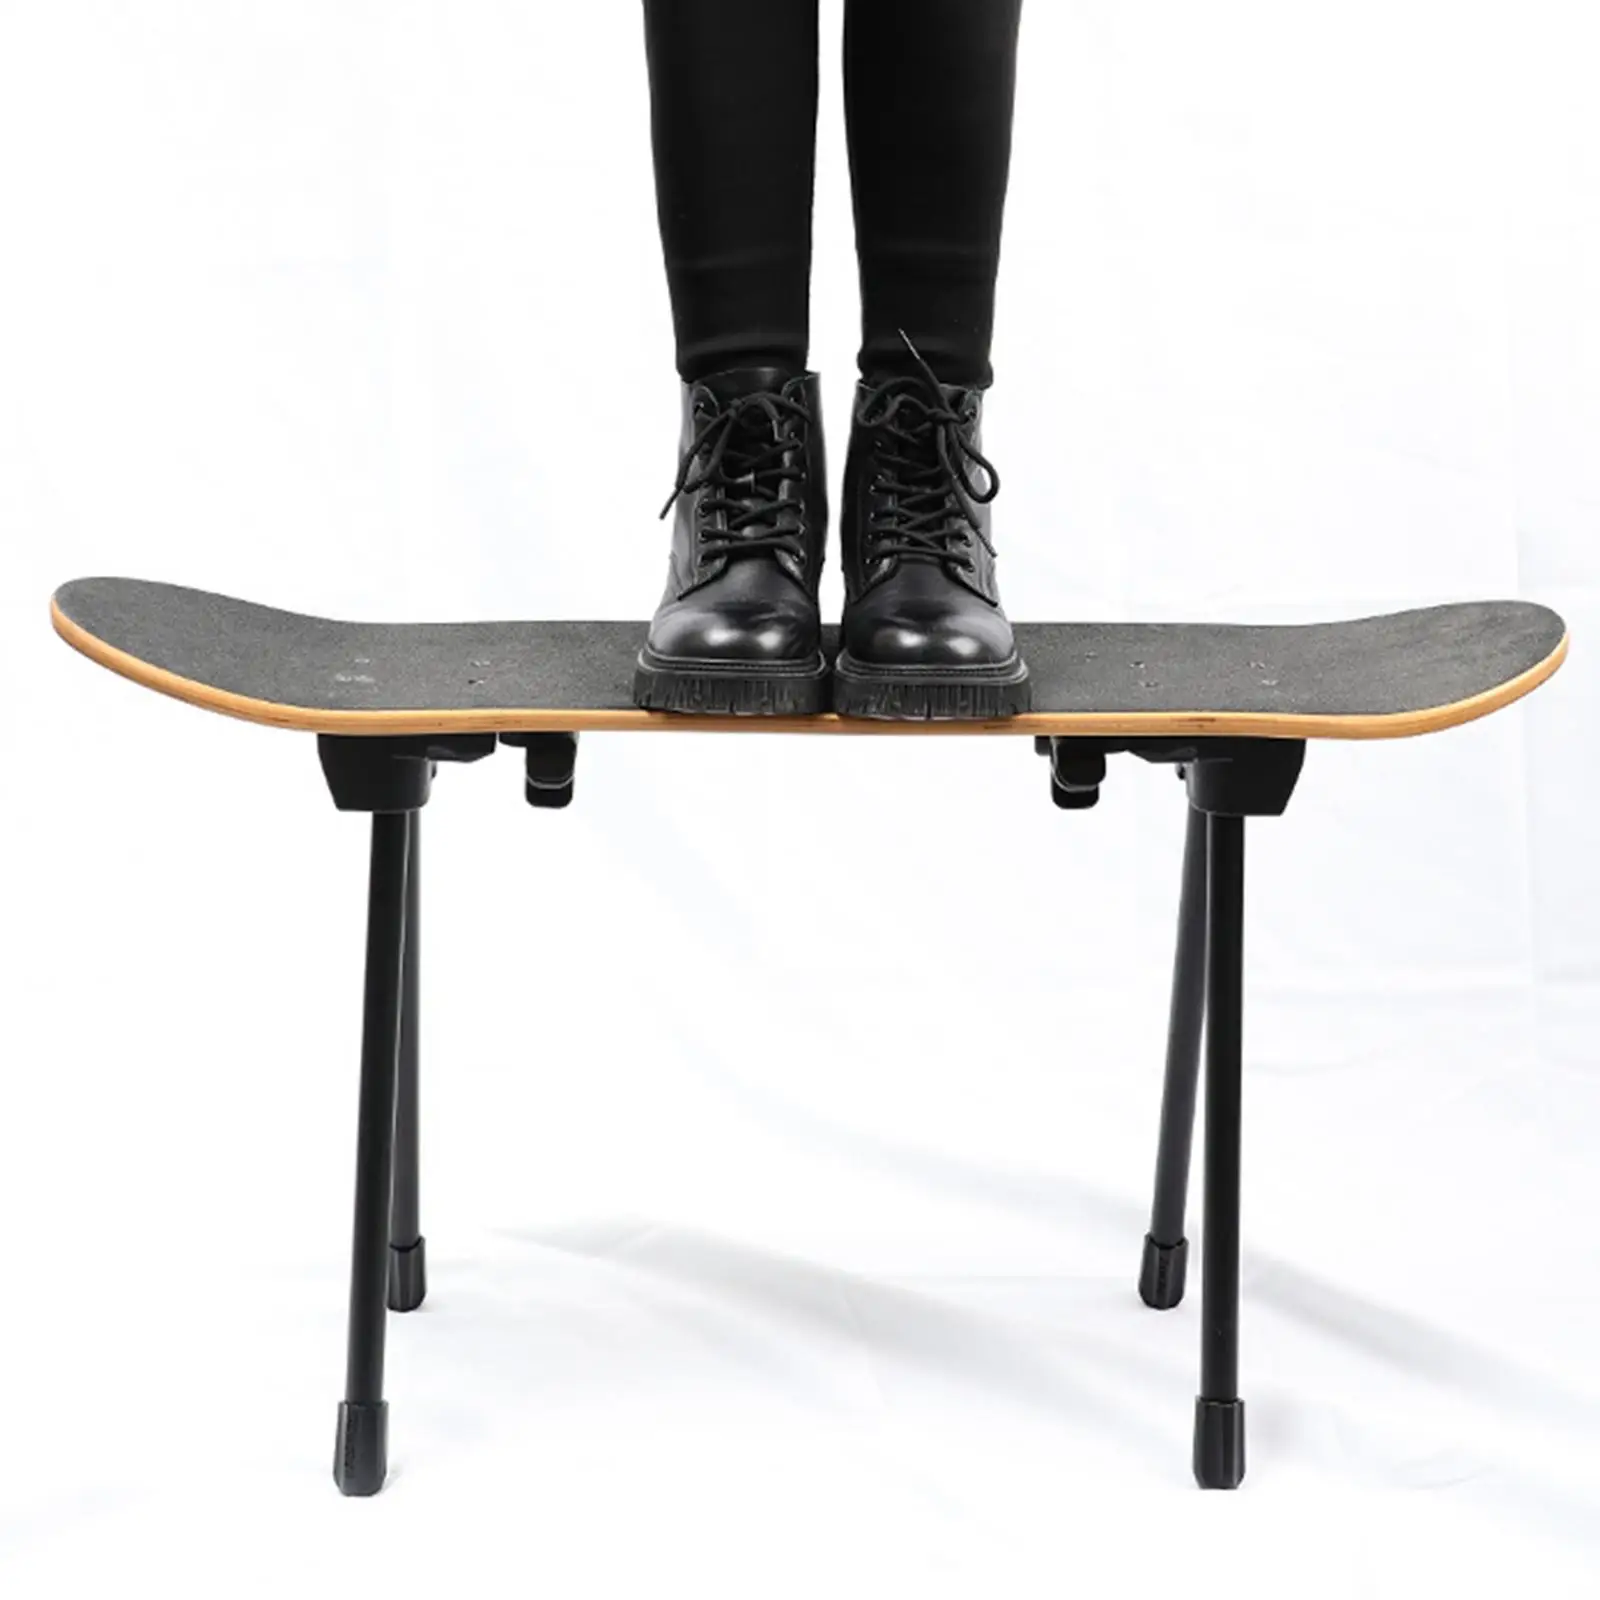 Skateboard Foot Camping Table Legs Stable Longboard Hoverboard Parts Picnic Table Leg DIY Bench Folding Table Stool Leg Picnic